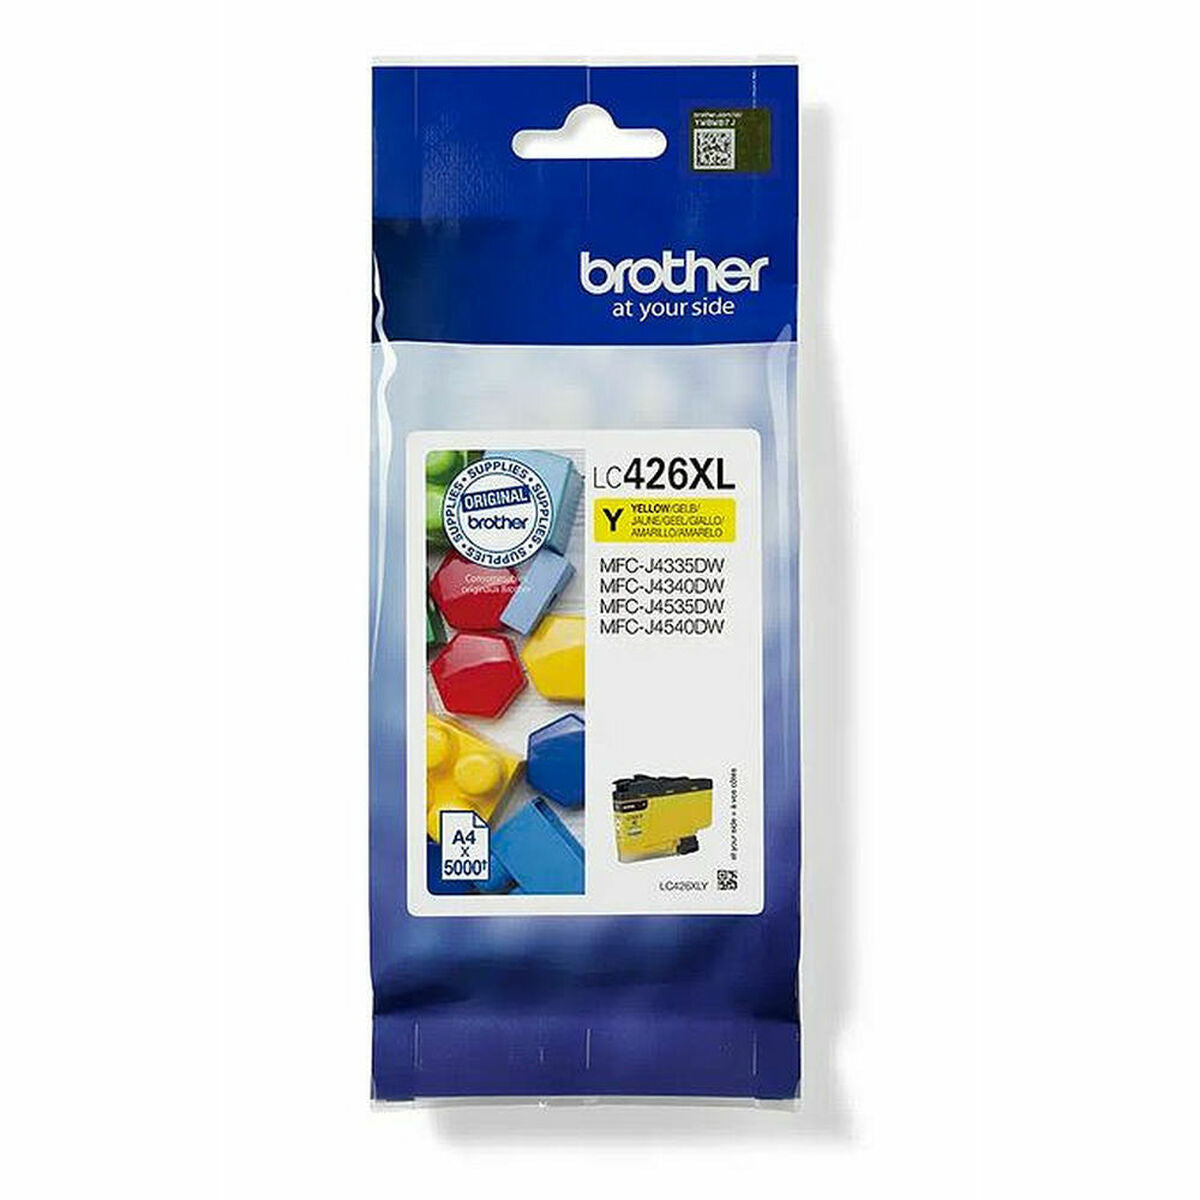 Original Ink Cartridge Brother LC-426XLY Yellow, Brother, Computing, Printers and accessories, original-ink-cartridge-brother-lc-426xly-yellow-1, Brand_Brother, category-reference-2609, category-reference-2642, category-reference-2874, category-reference-t-19685, category-reference-t-19911, category-reference-t-21377, category-reference-t-25688, category-reference-t-29848, Condition_NEW, office, Price_50 - 100, Teleworking, RiotNook